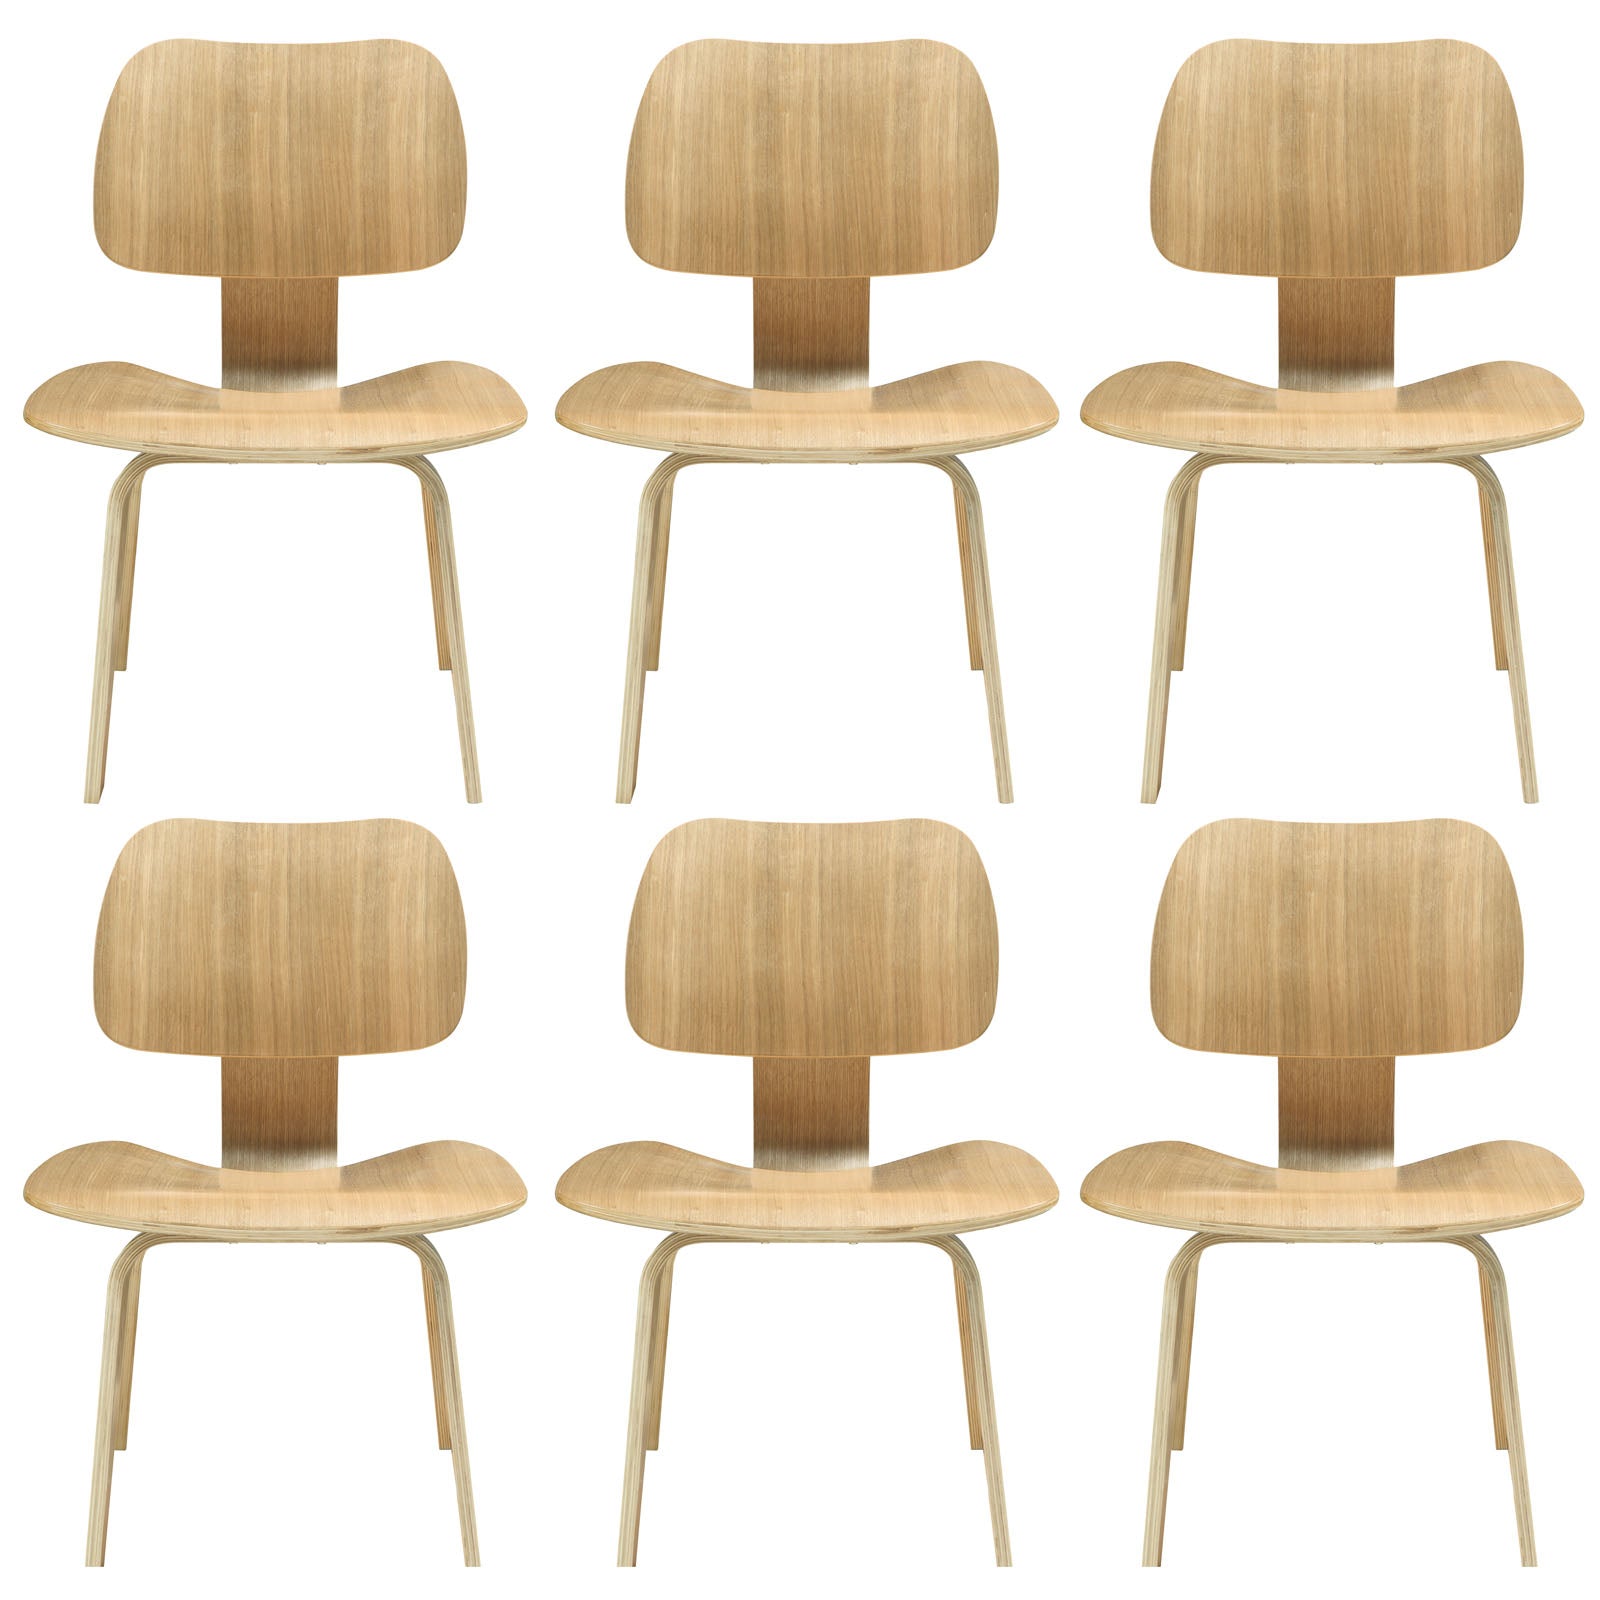 Fathom Dining Chairs Set of 6 - East Shore Modern Home Furnishings